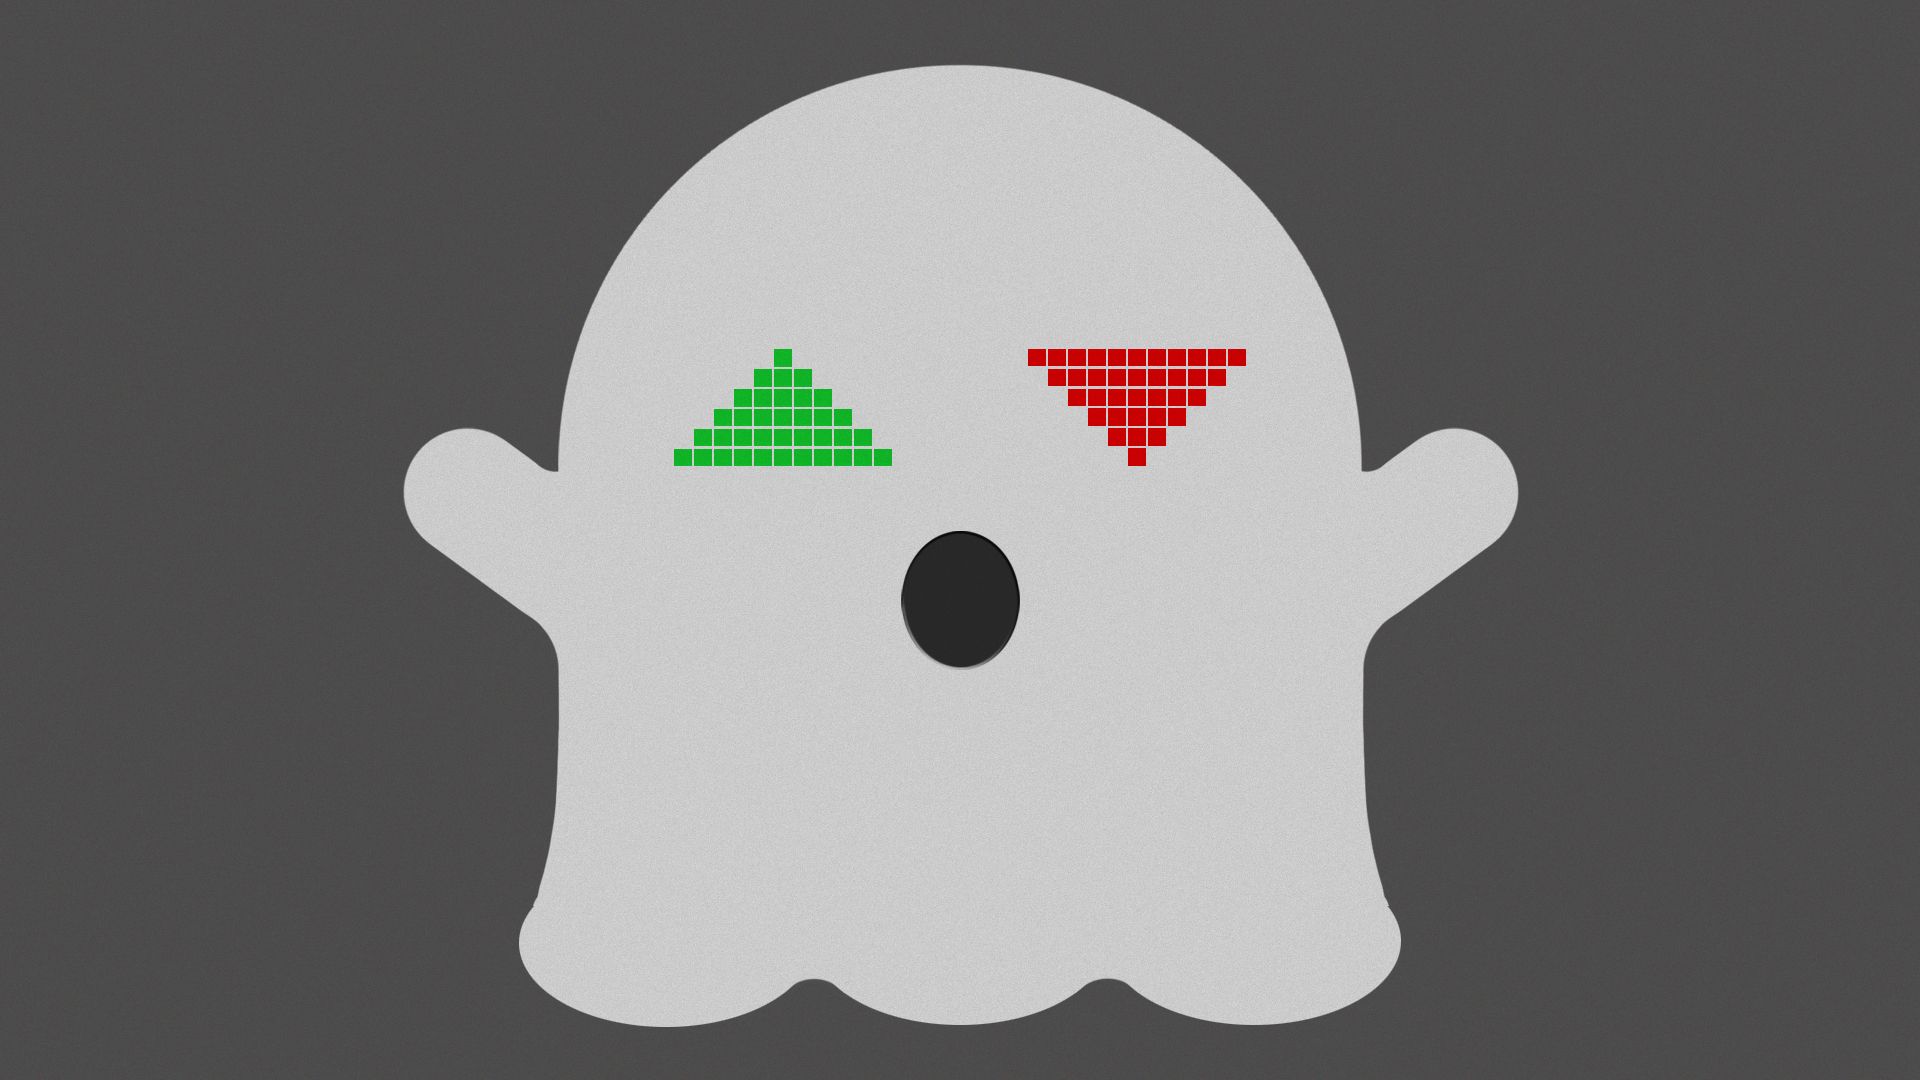 illustration of a ghost with up down arrows for eyes